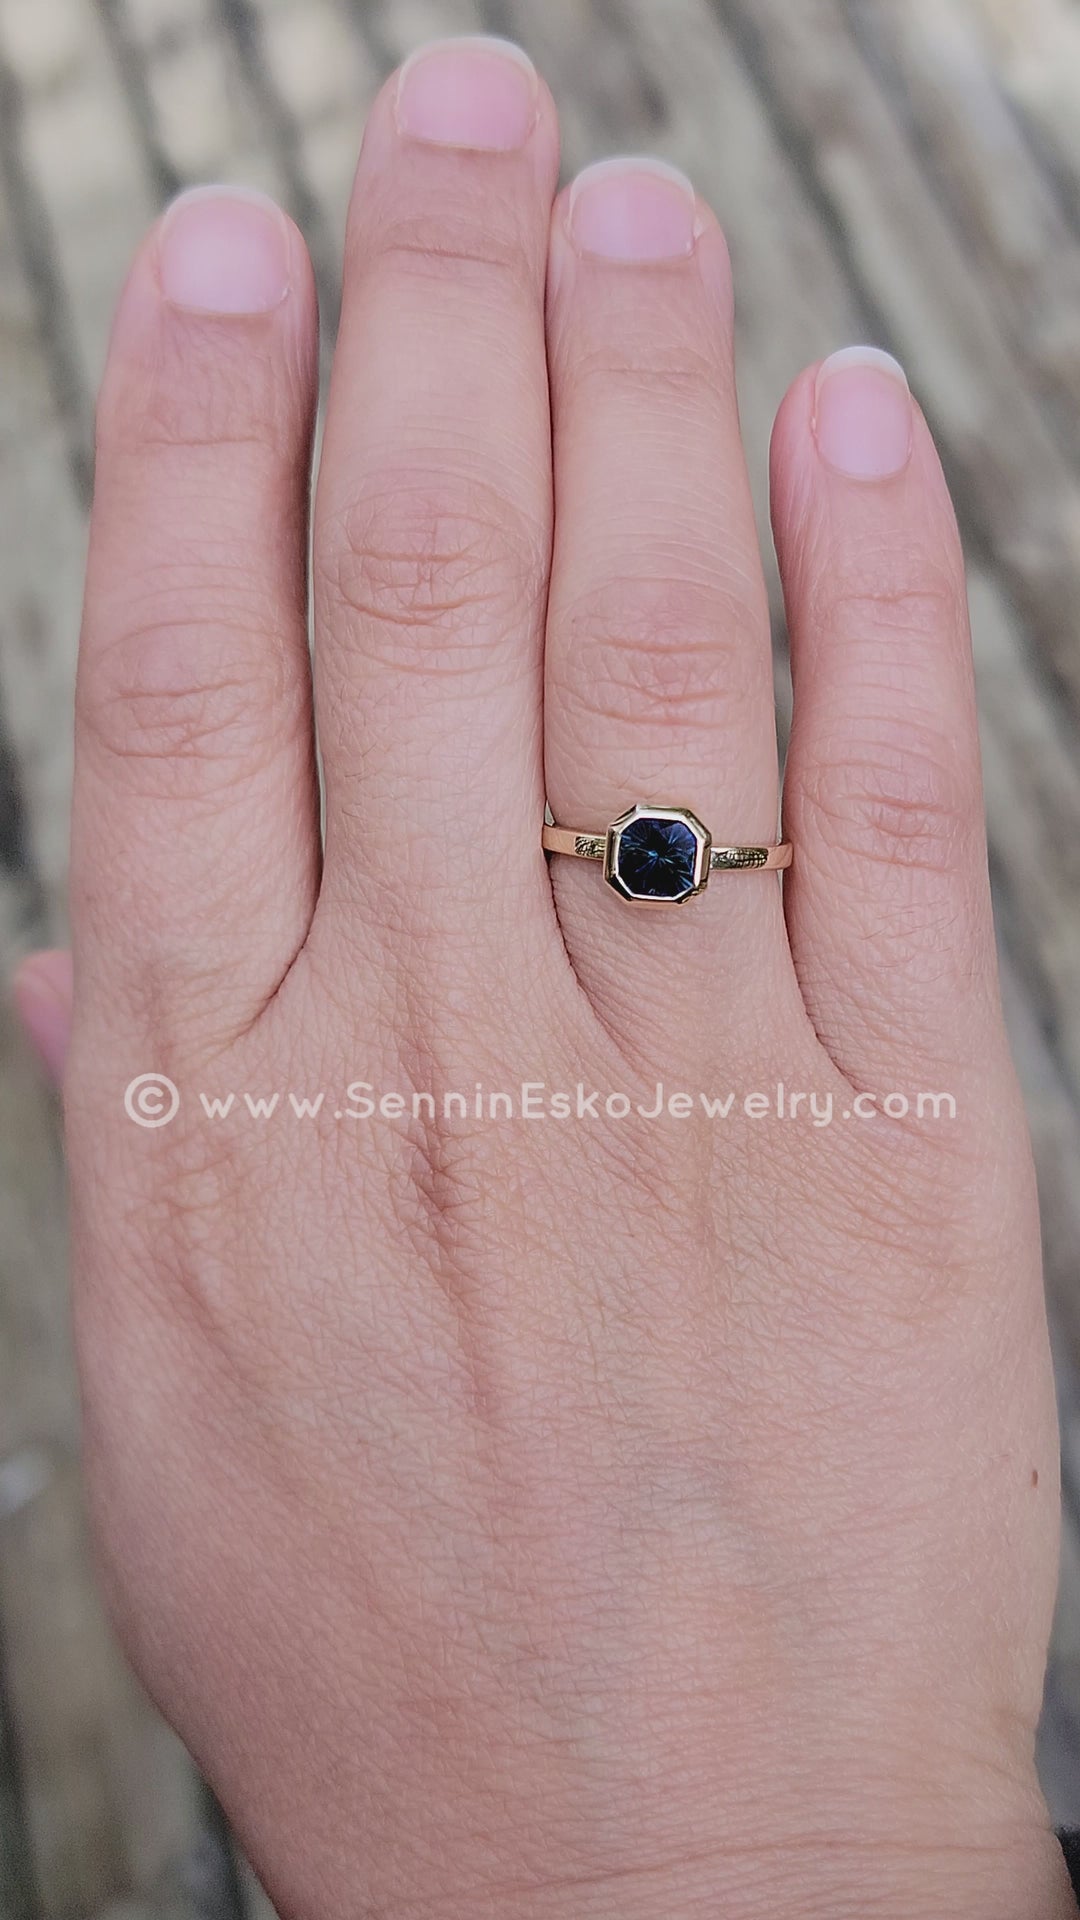 PRÊT À EXPÉDIER 1.39 Carat Inky Blue/Green Sapphire 14kt Yellow Gold Ring - Taille 6.5